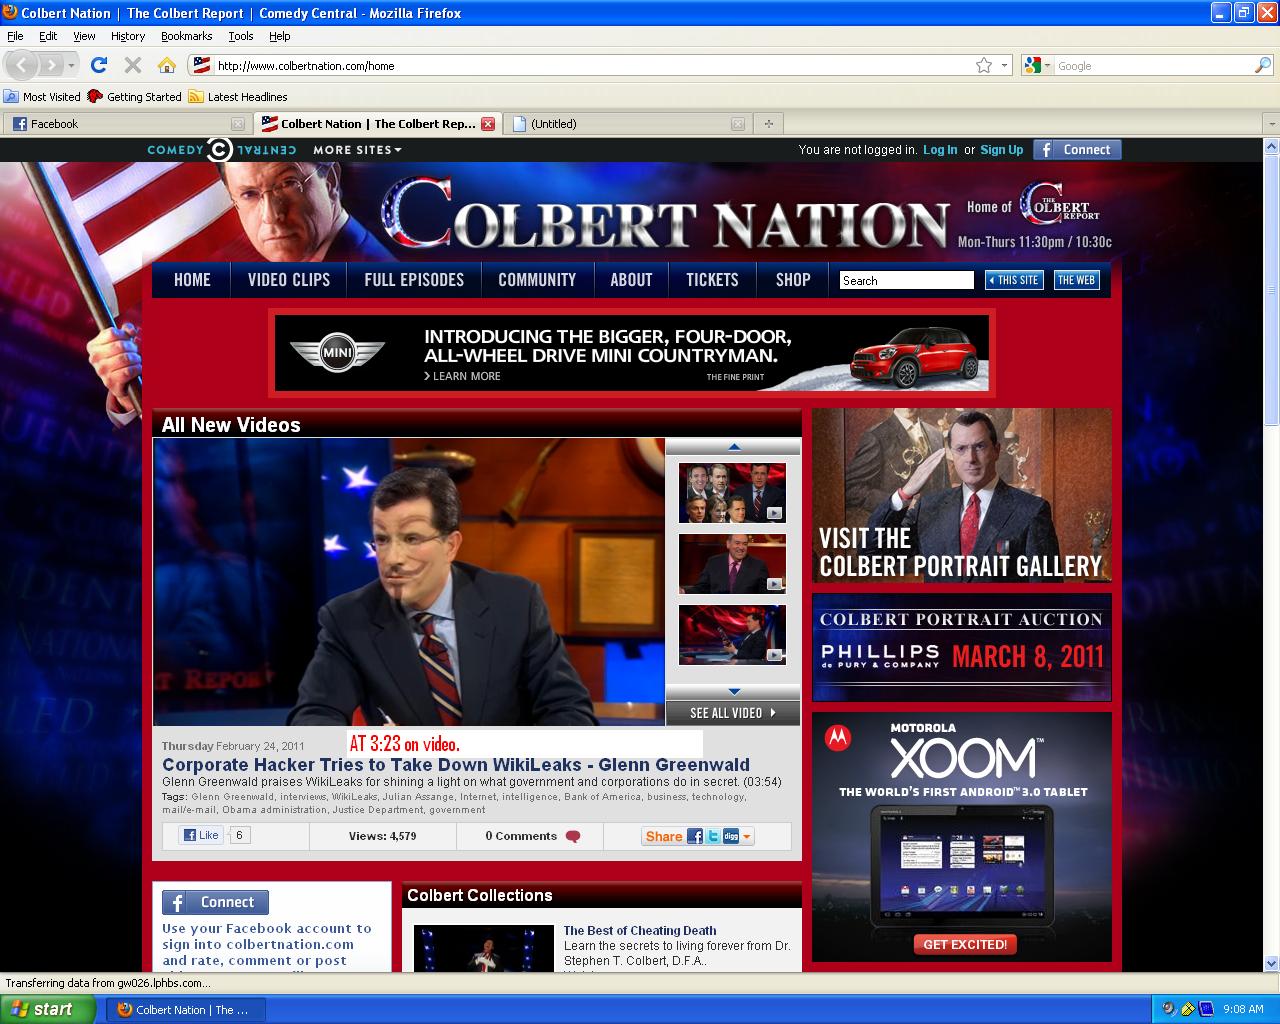 Okay, freaking out here a little. This was at 3:23 on the video talking about Cyber-Warfare with corporate interests.

http://www.colbertnation.com/the-colbert-report-videos/375429/february-24-2011/corporate-hacker-tries-to-take-down-wikileaks---glenn-greenwald

The image was superimposed over his face for a fraction of a second and looks... li